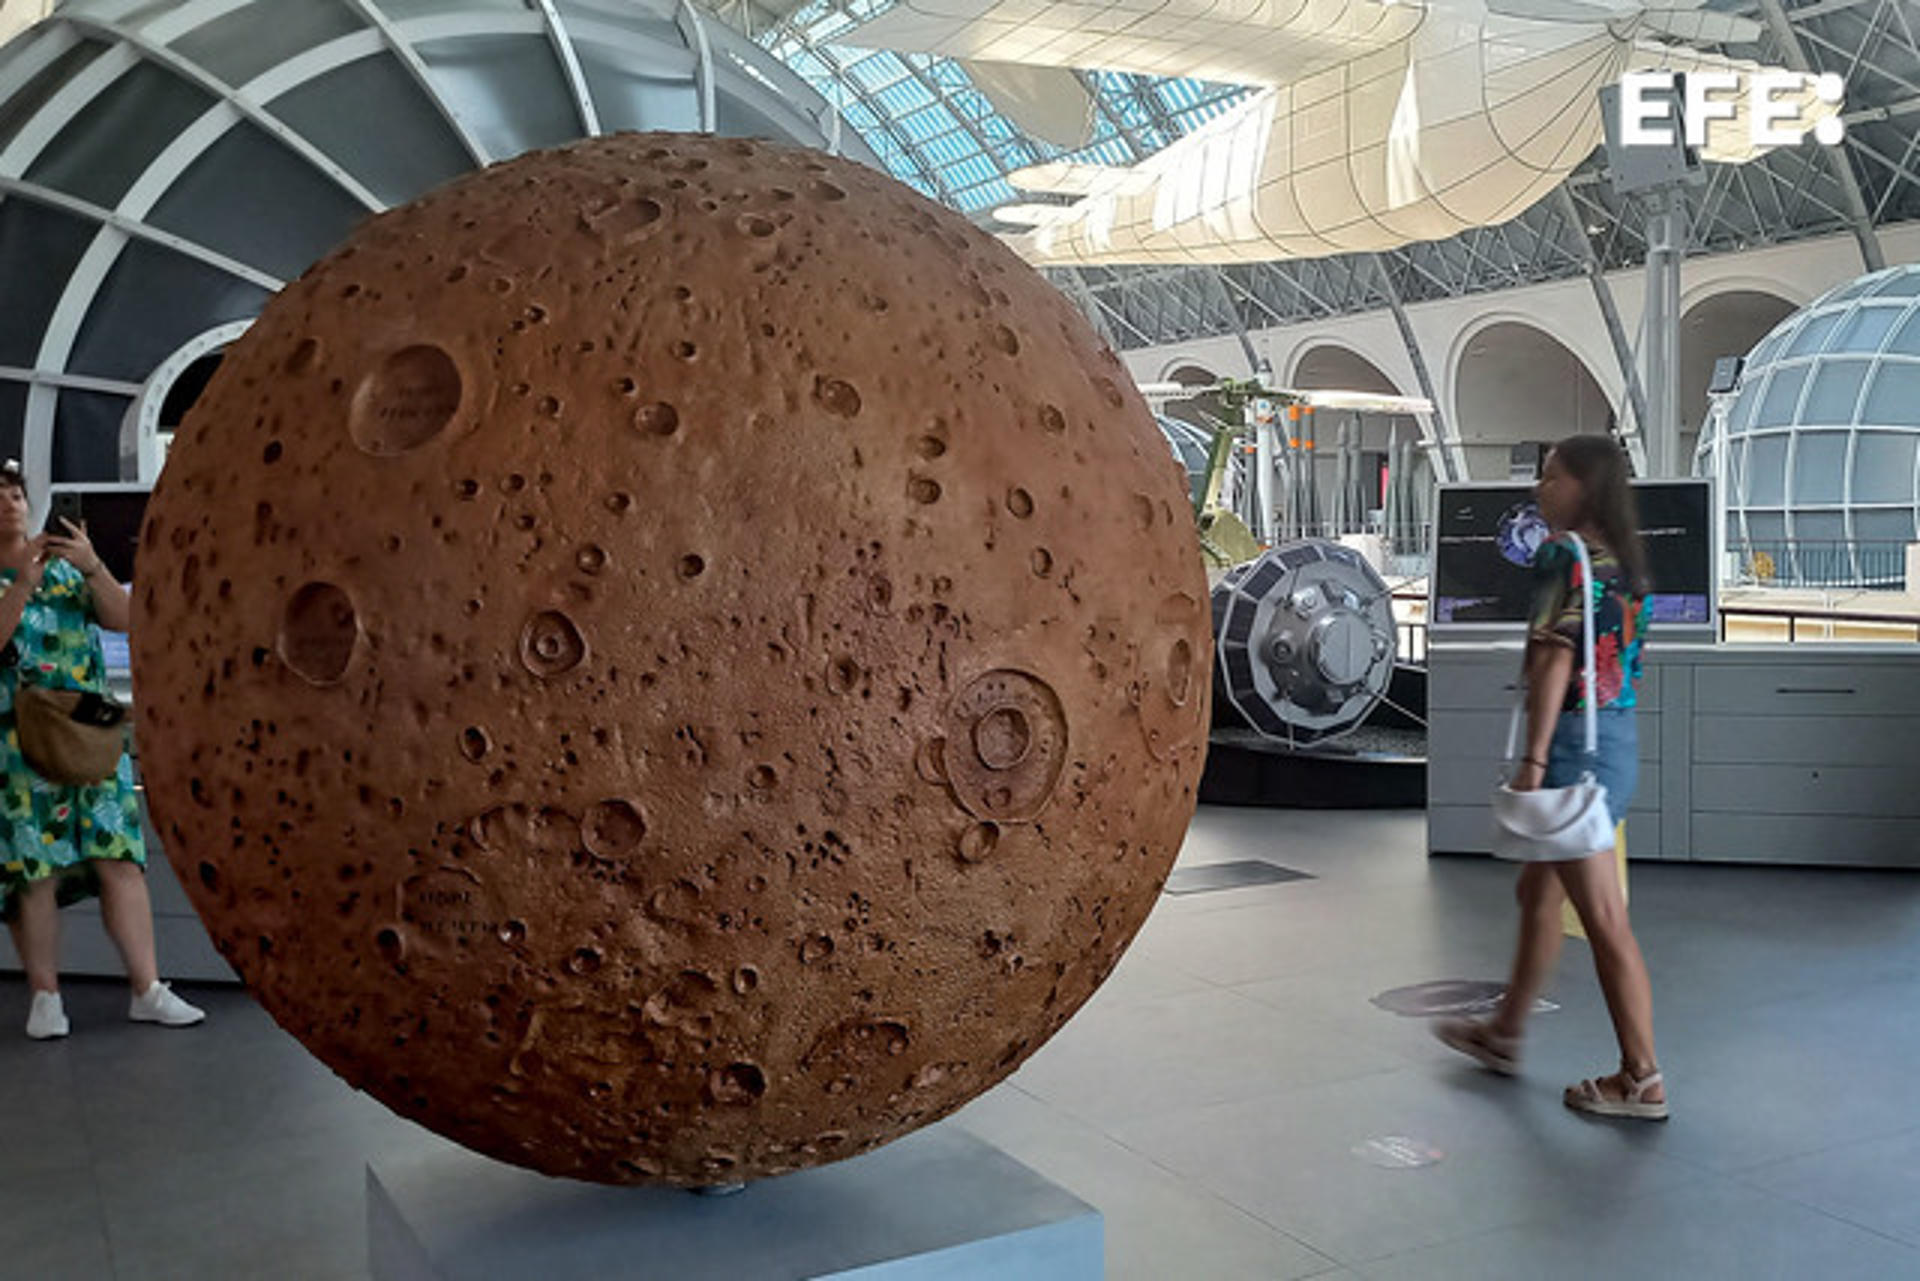 A person walks next to a replica of the Moon at the Museum of Cosmonautics in Moscow, Russia. EFE/MUSEUM OF COSMONAUTICS **EDITORIAL USE ONLU/MANDATORY CREDIT**